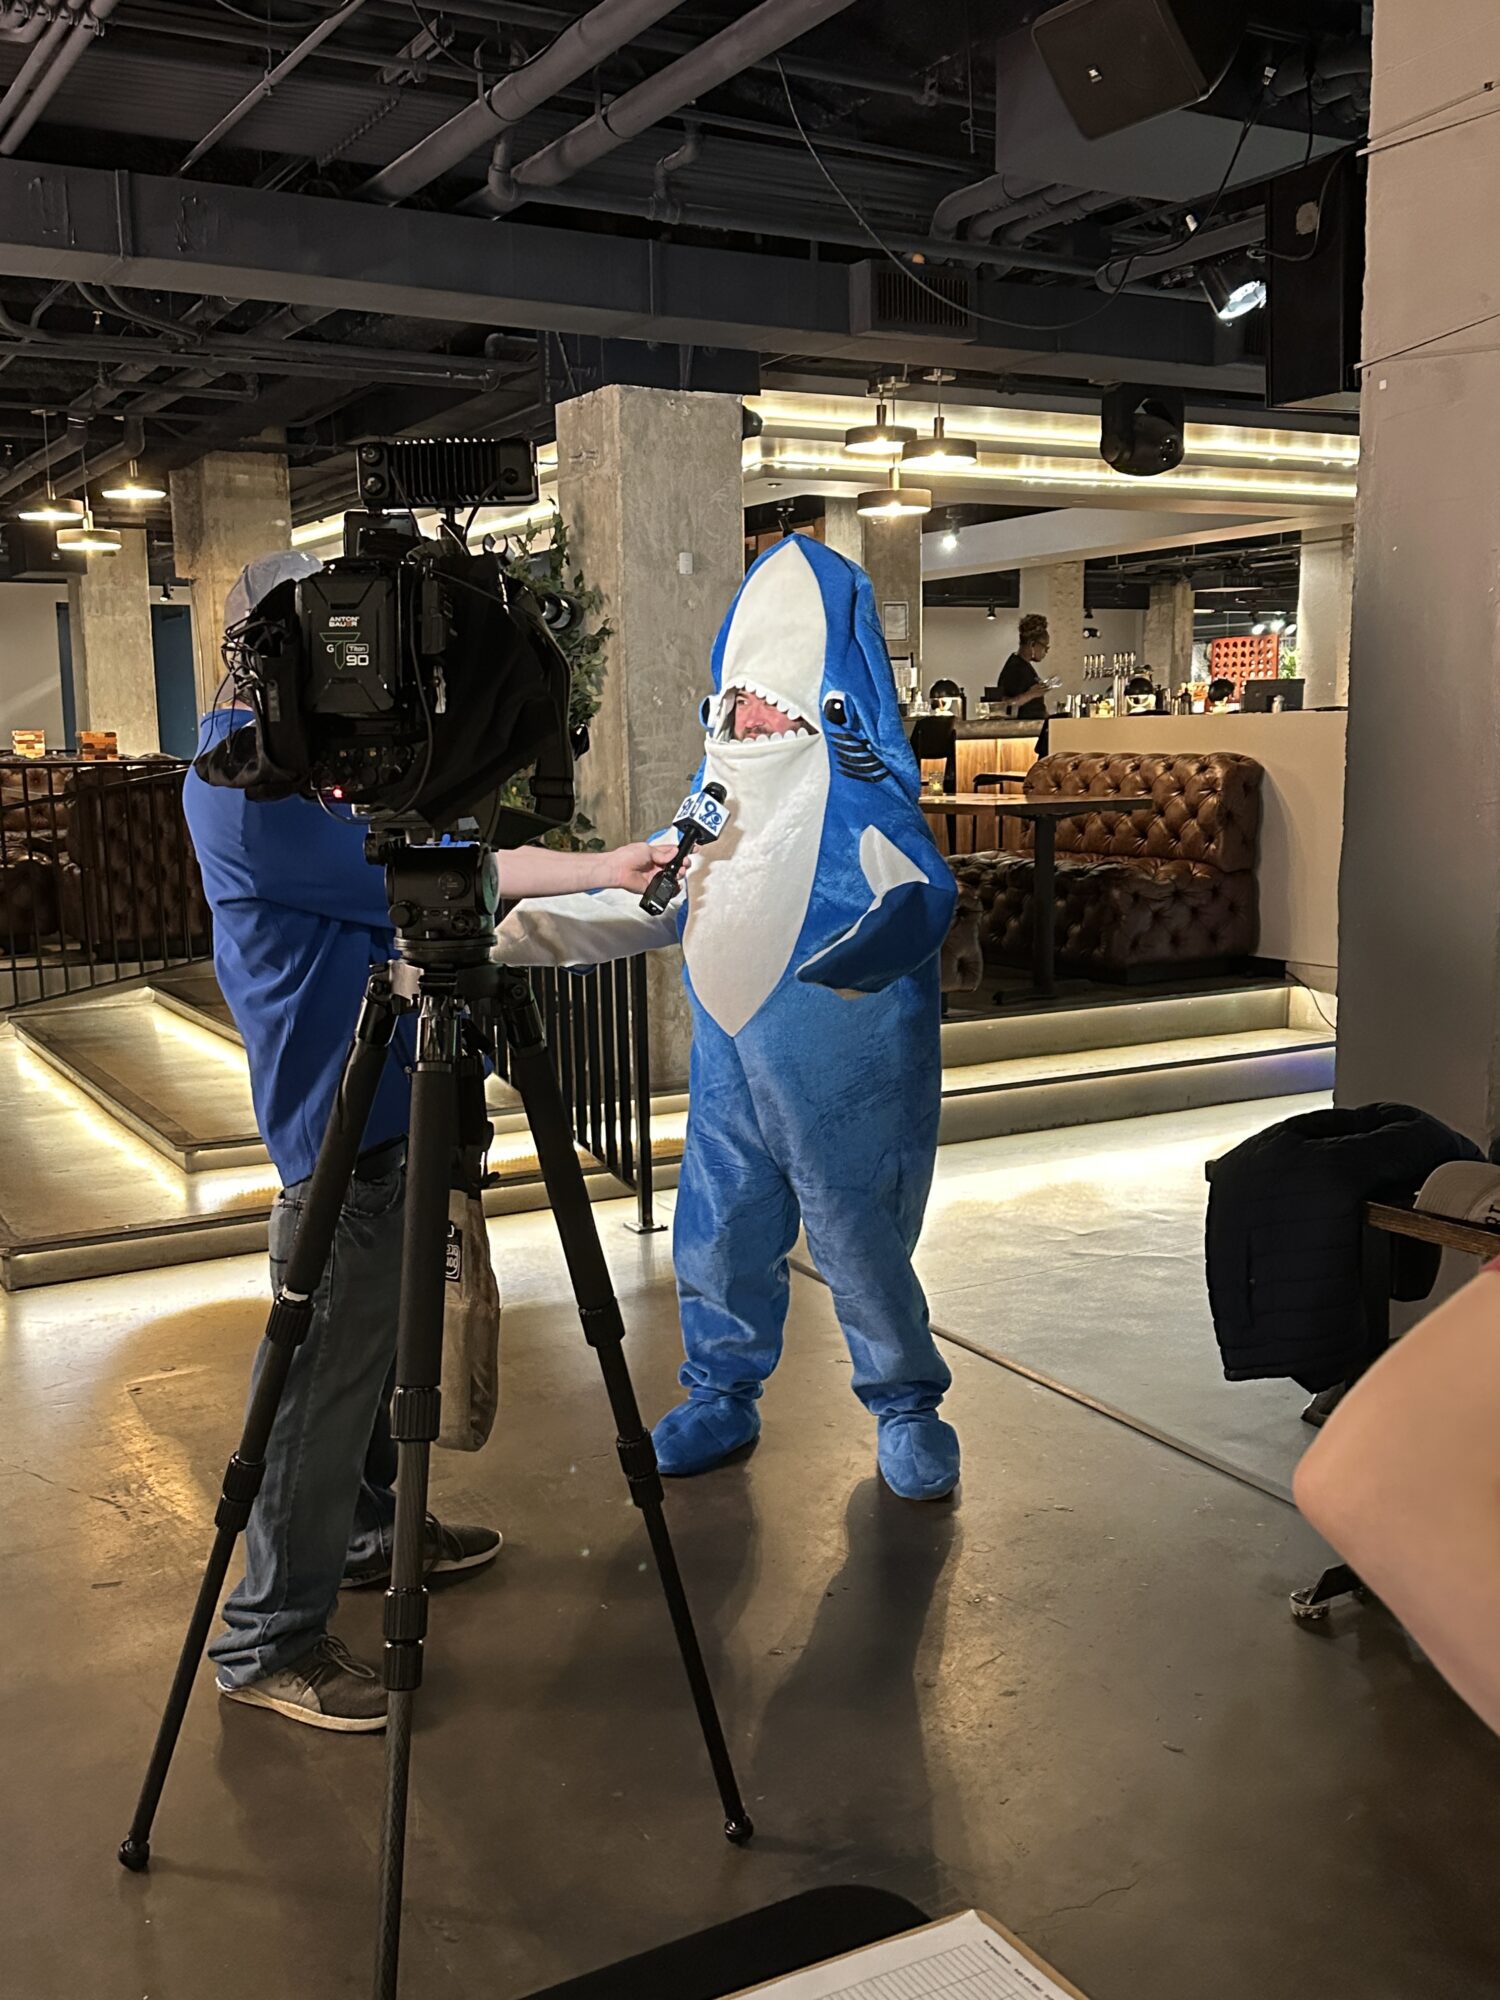 Guy in shark costume being interviewed on camera